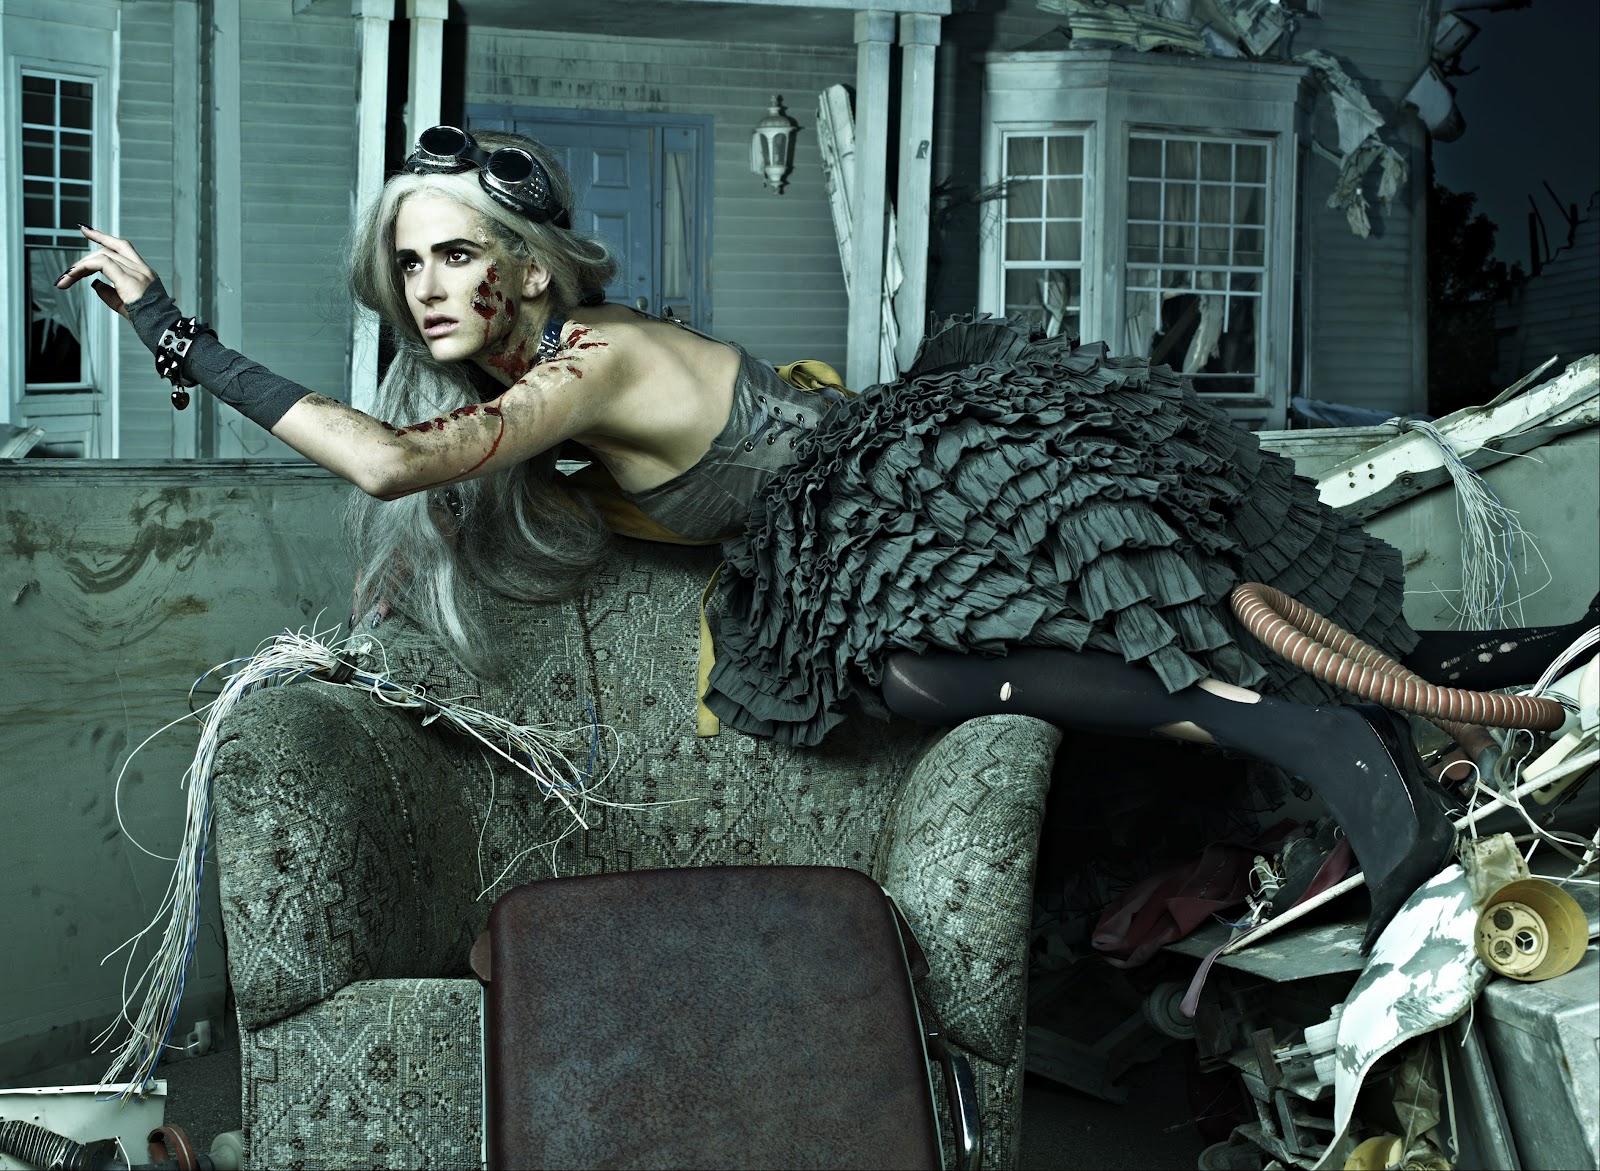 ANTM College Edition: Episode 4 "Tyler Perry & Zombies" .